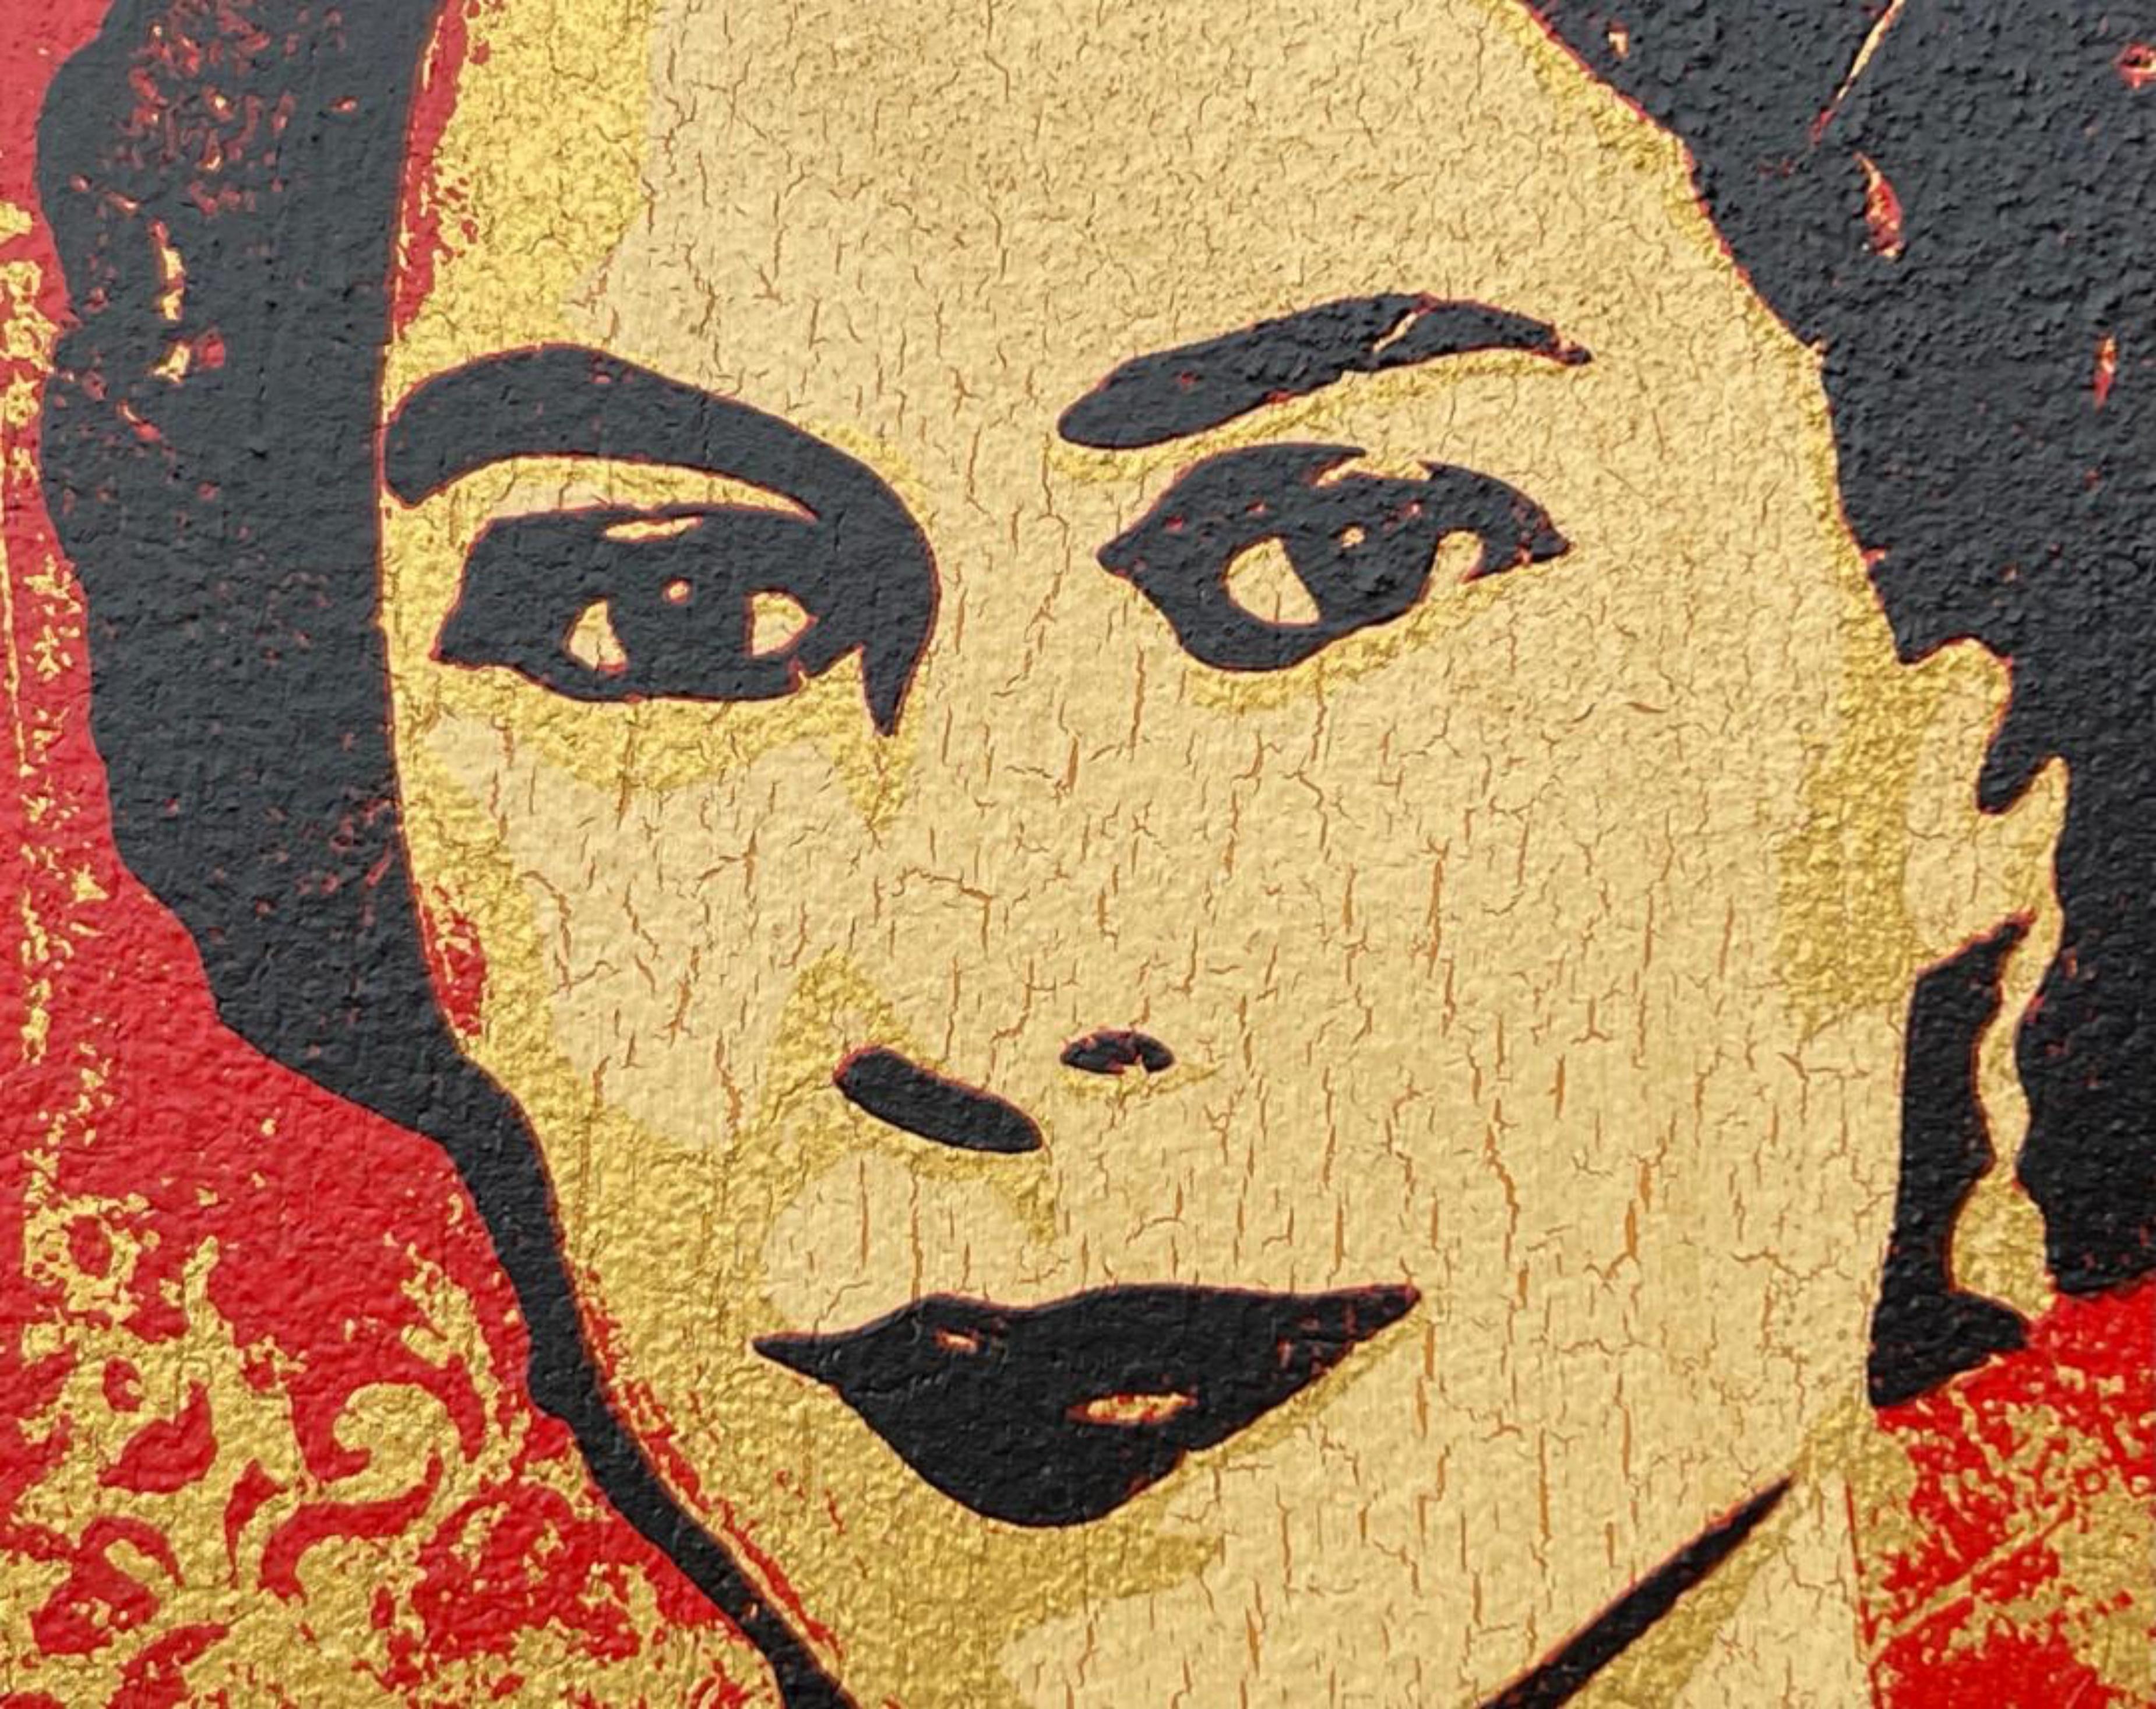 God Save the Queen Homage to Queen Elizabeth II -one of only seven on wood panel - Pop Art Mixed Media Art by Shepard Fairey